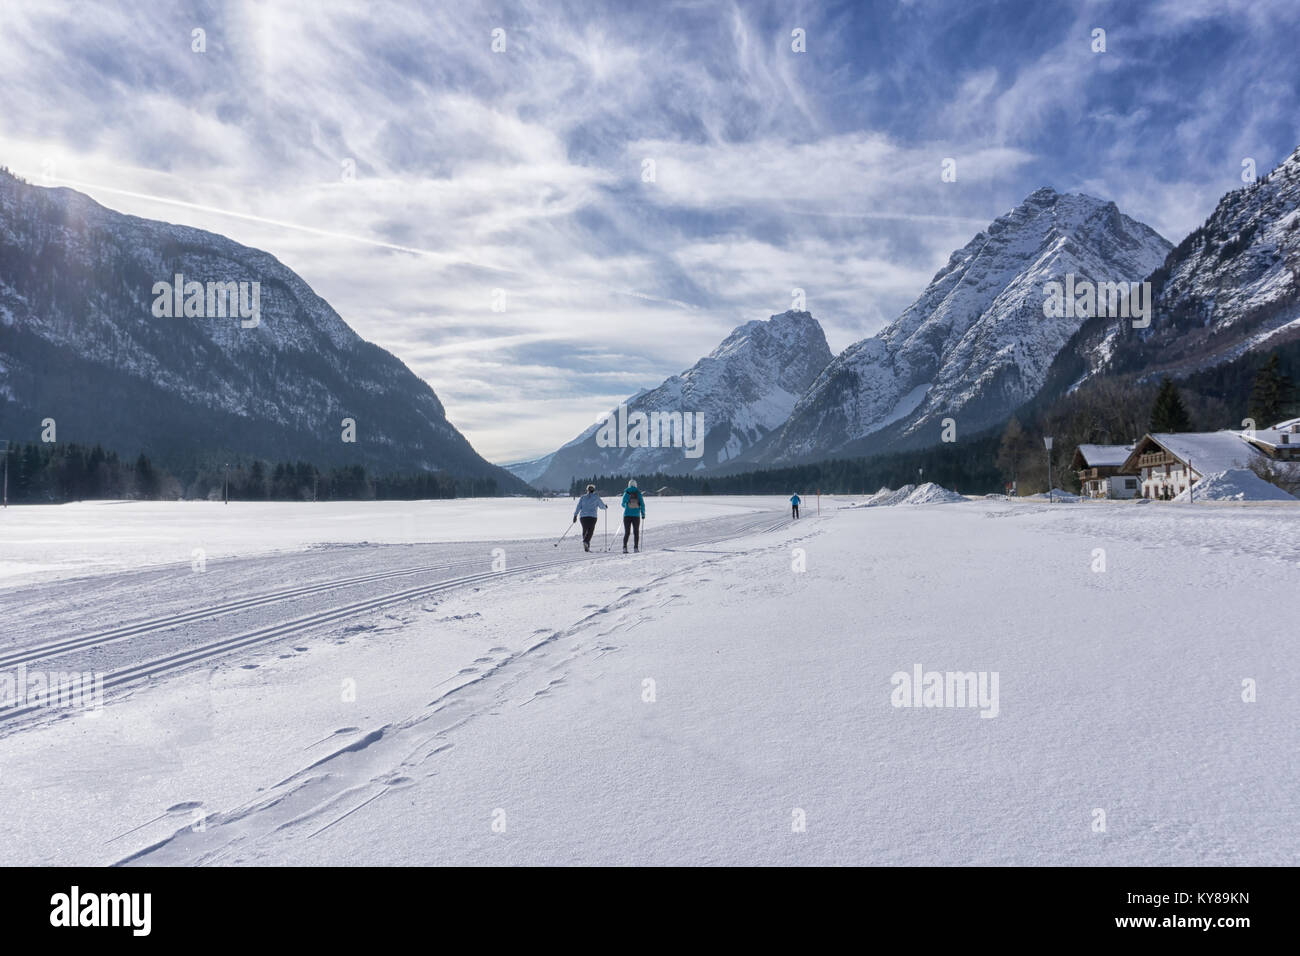 Winter mountains landscape with groomed ski track and blue sky with white clouds Stock Photo